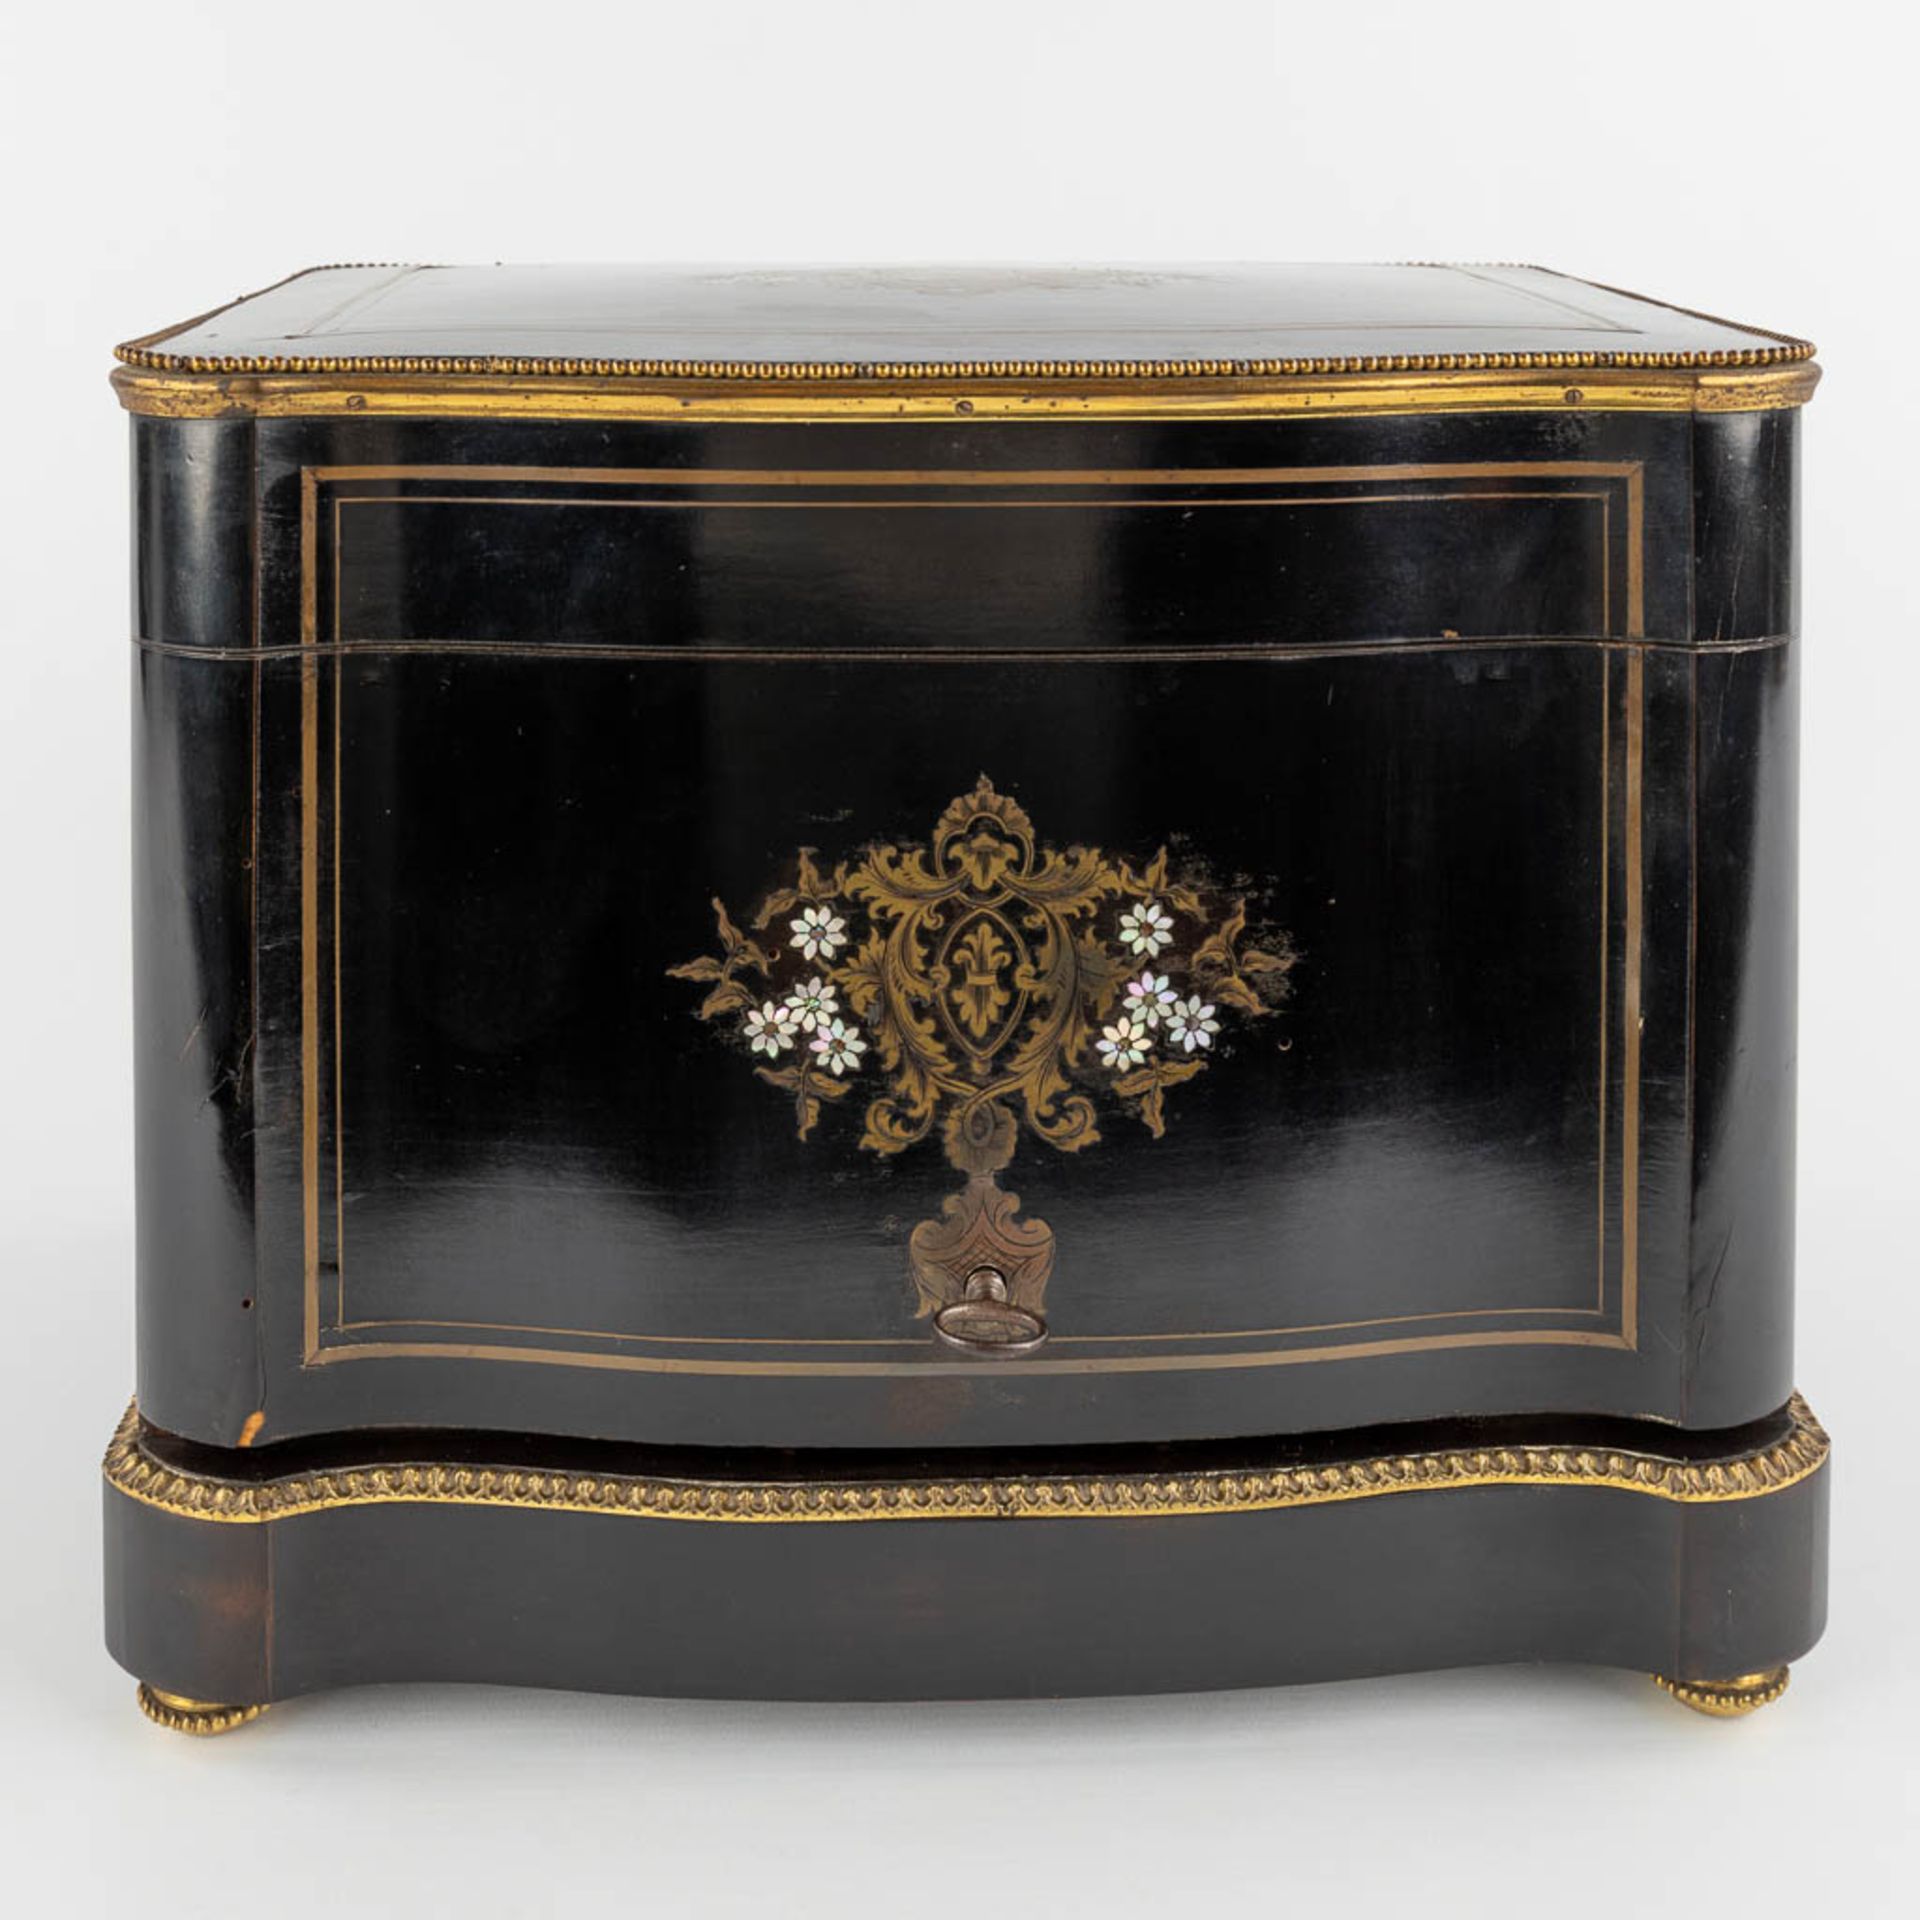 An antique Cave-à-liqueur, liquor box, ebonised wood inlaid with mother of pearl and copper. 19th C. - Image 4 of 16